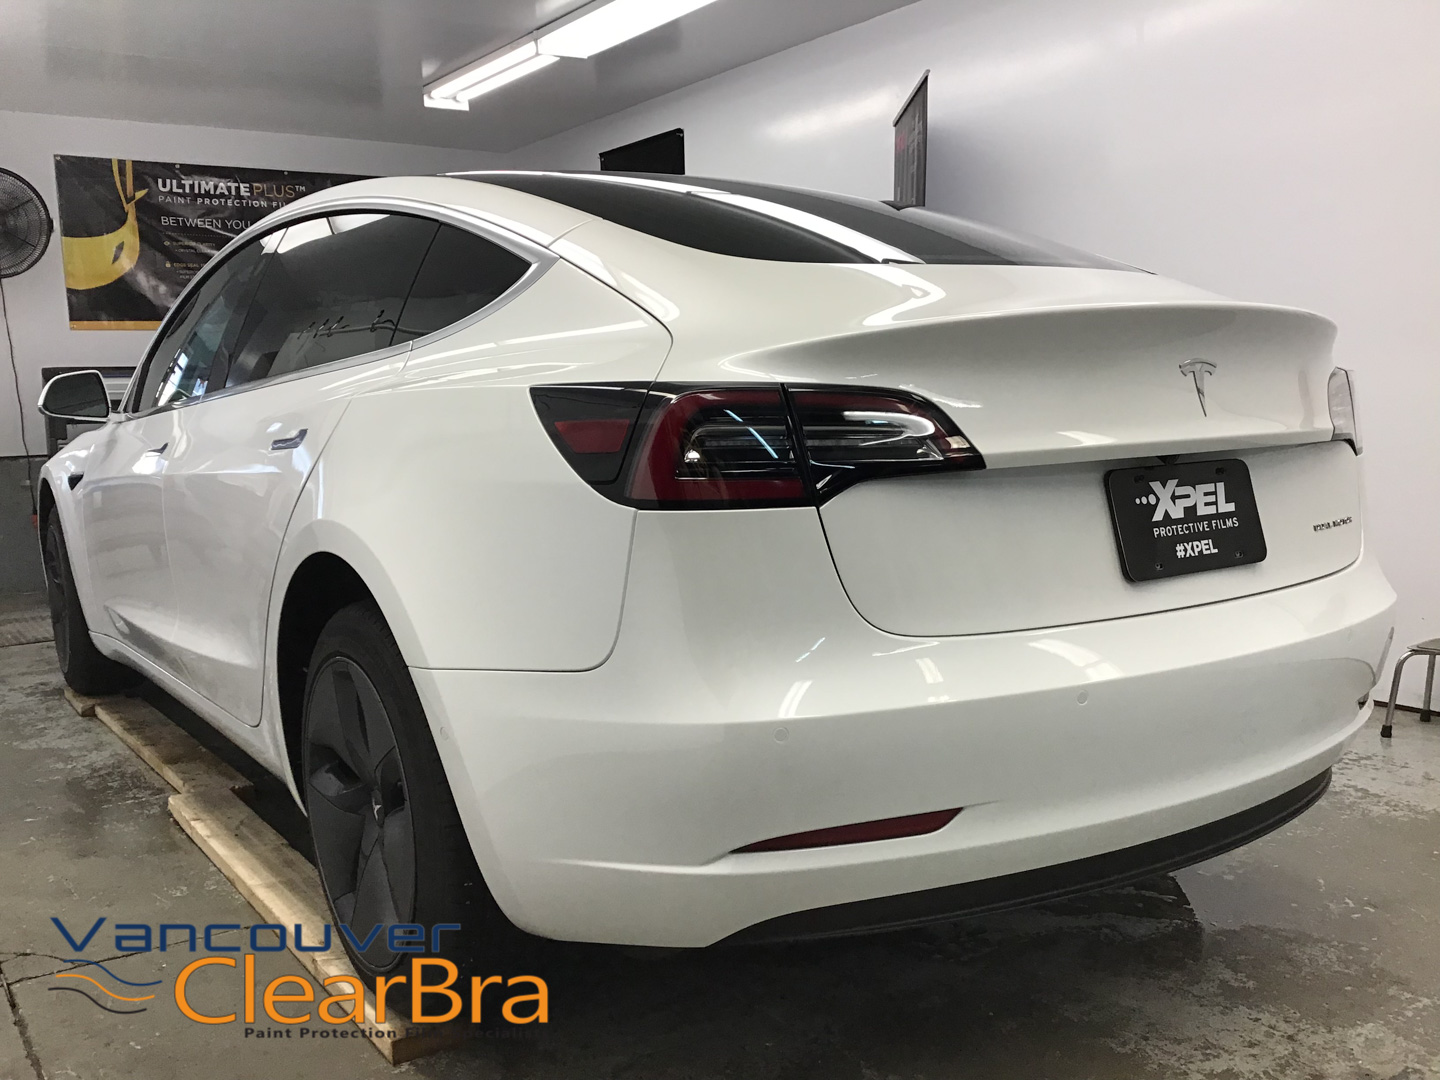 Tesla Model 3 Xpel Ultimate - Vancouver ClearBra, This Tesl…